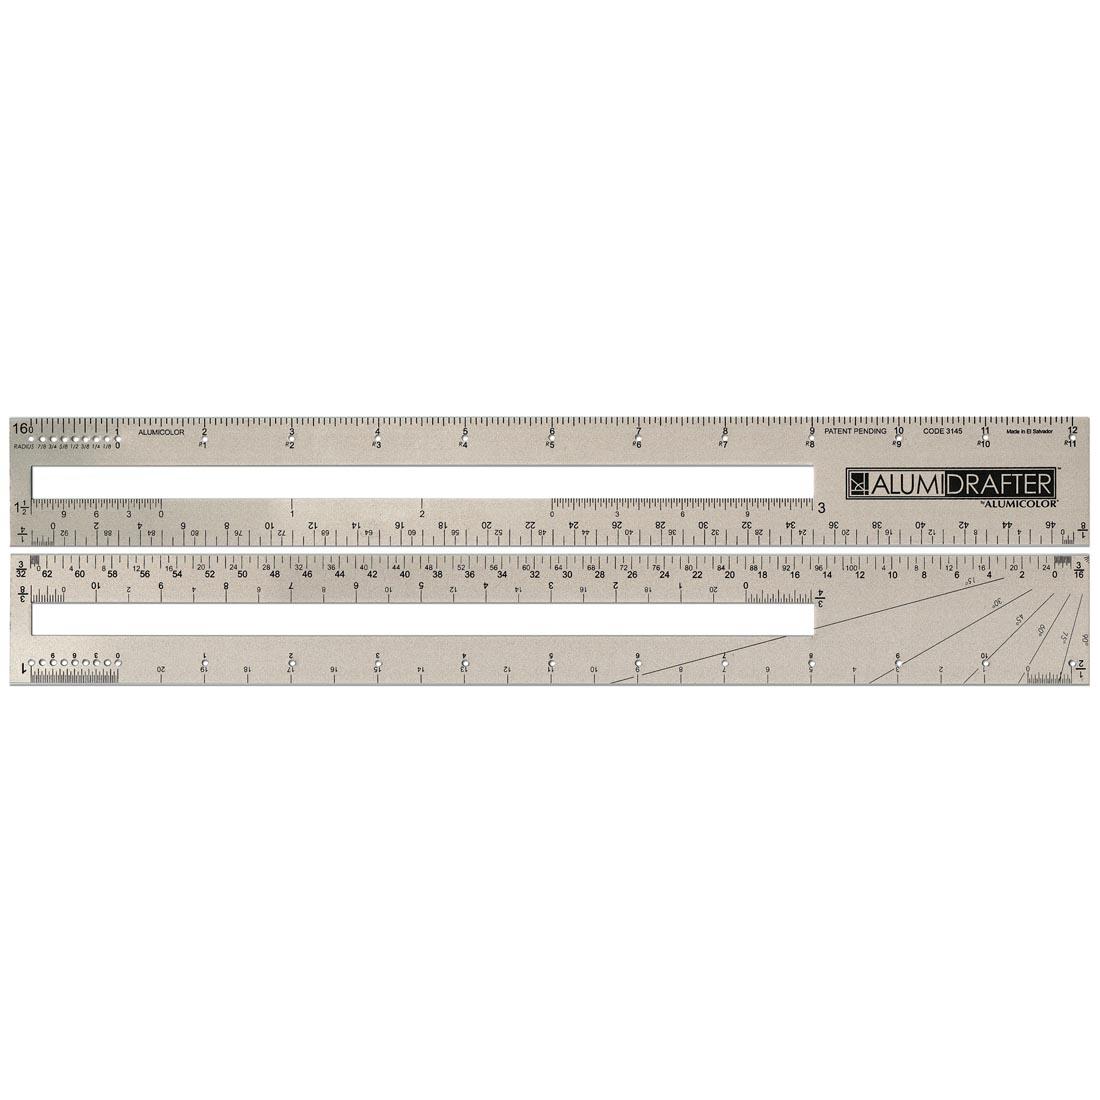 Architect AlumiDrafter Ruler shown front and back